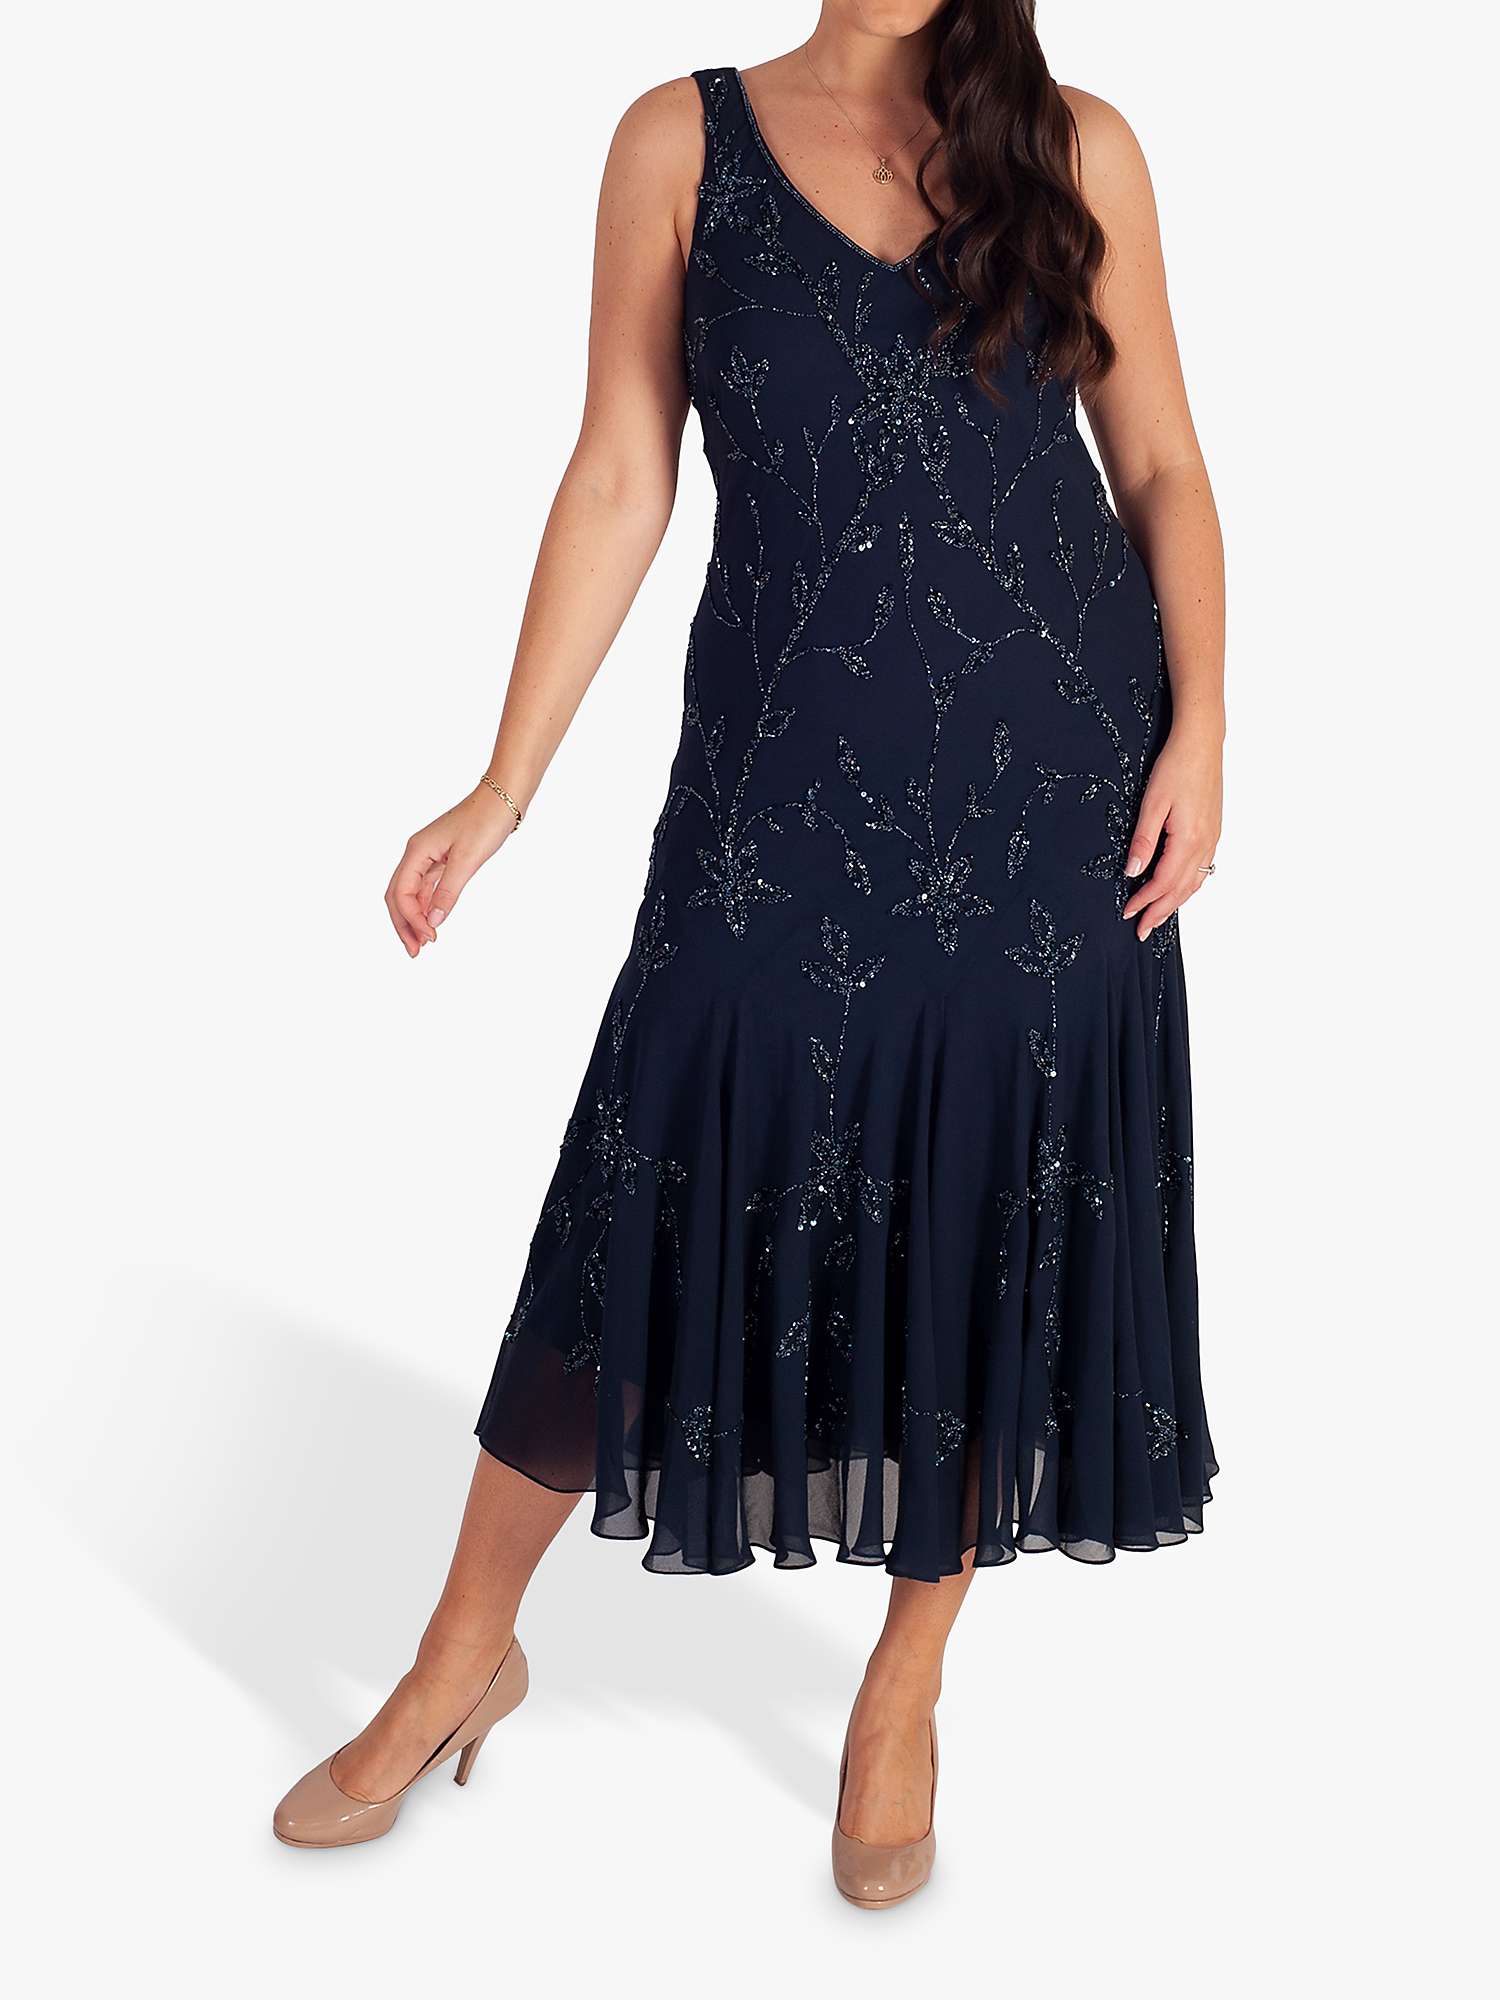 Buy chesca Allover Beaded Dress, Navy Online at johnlewis.com